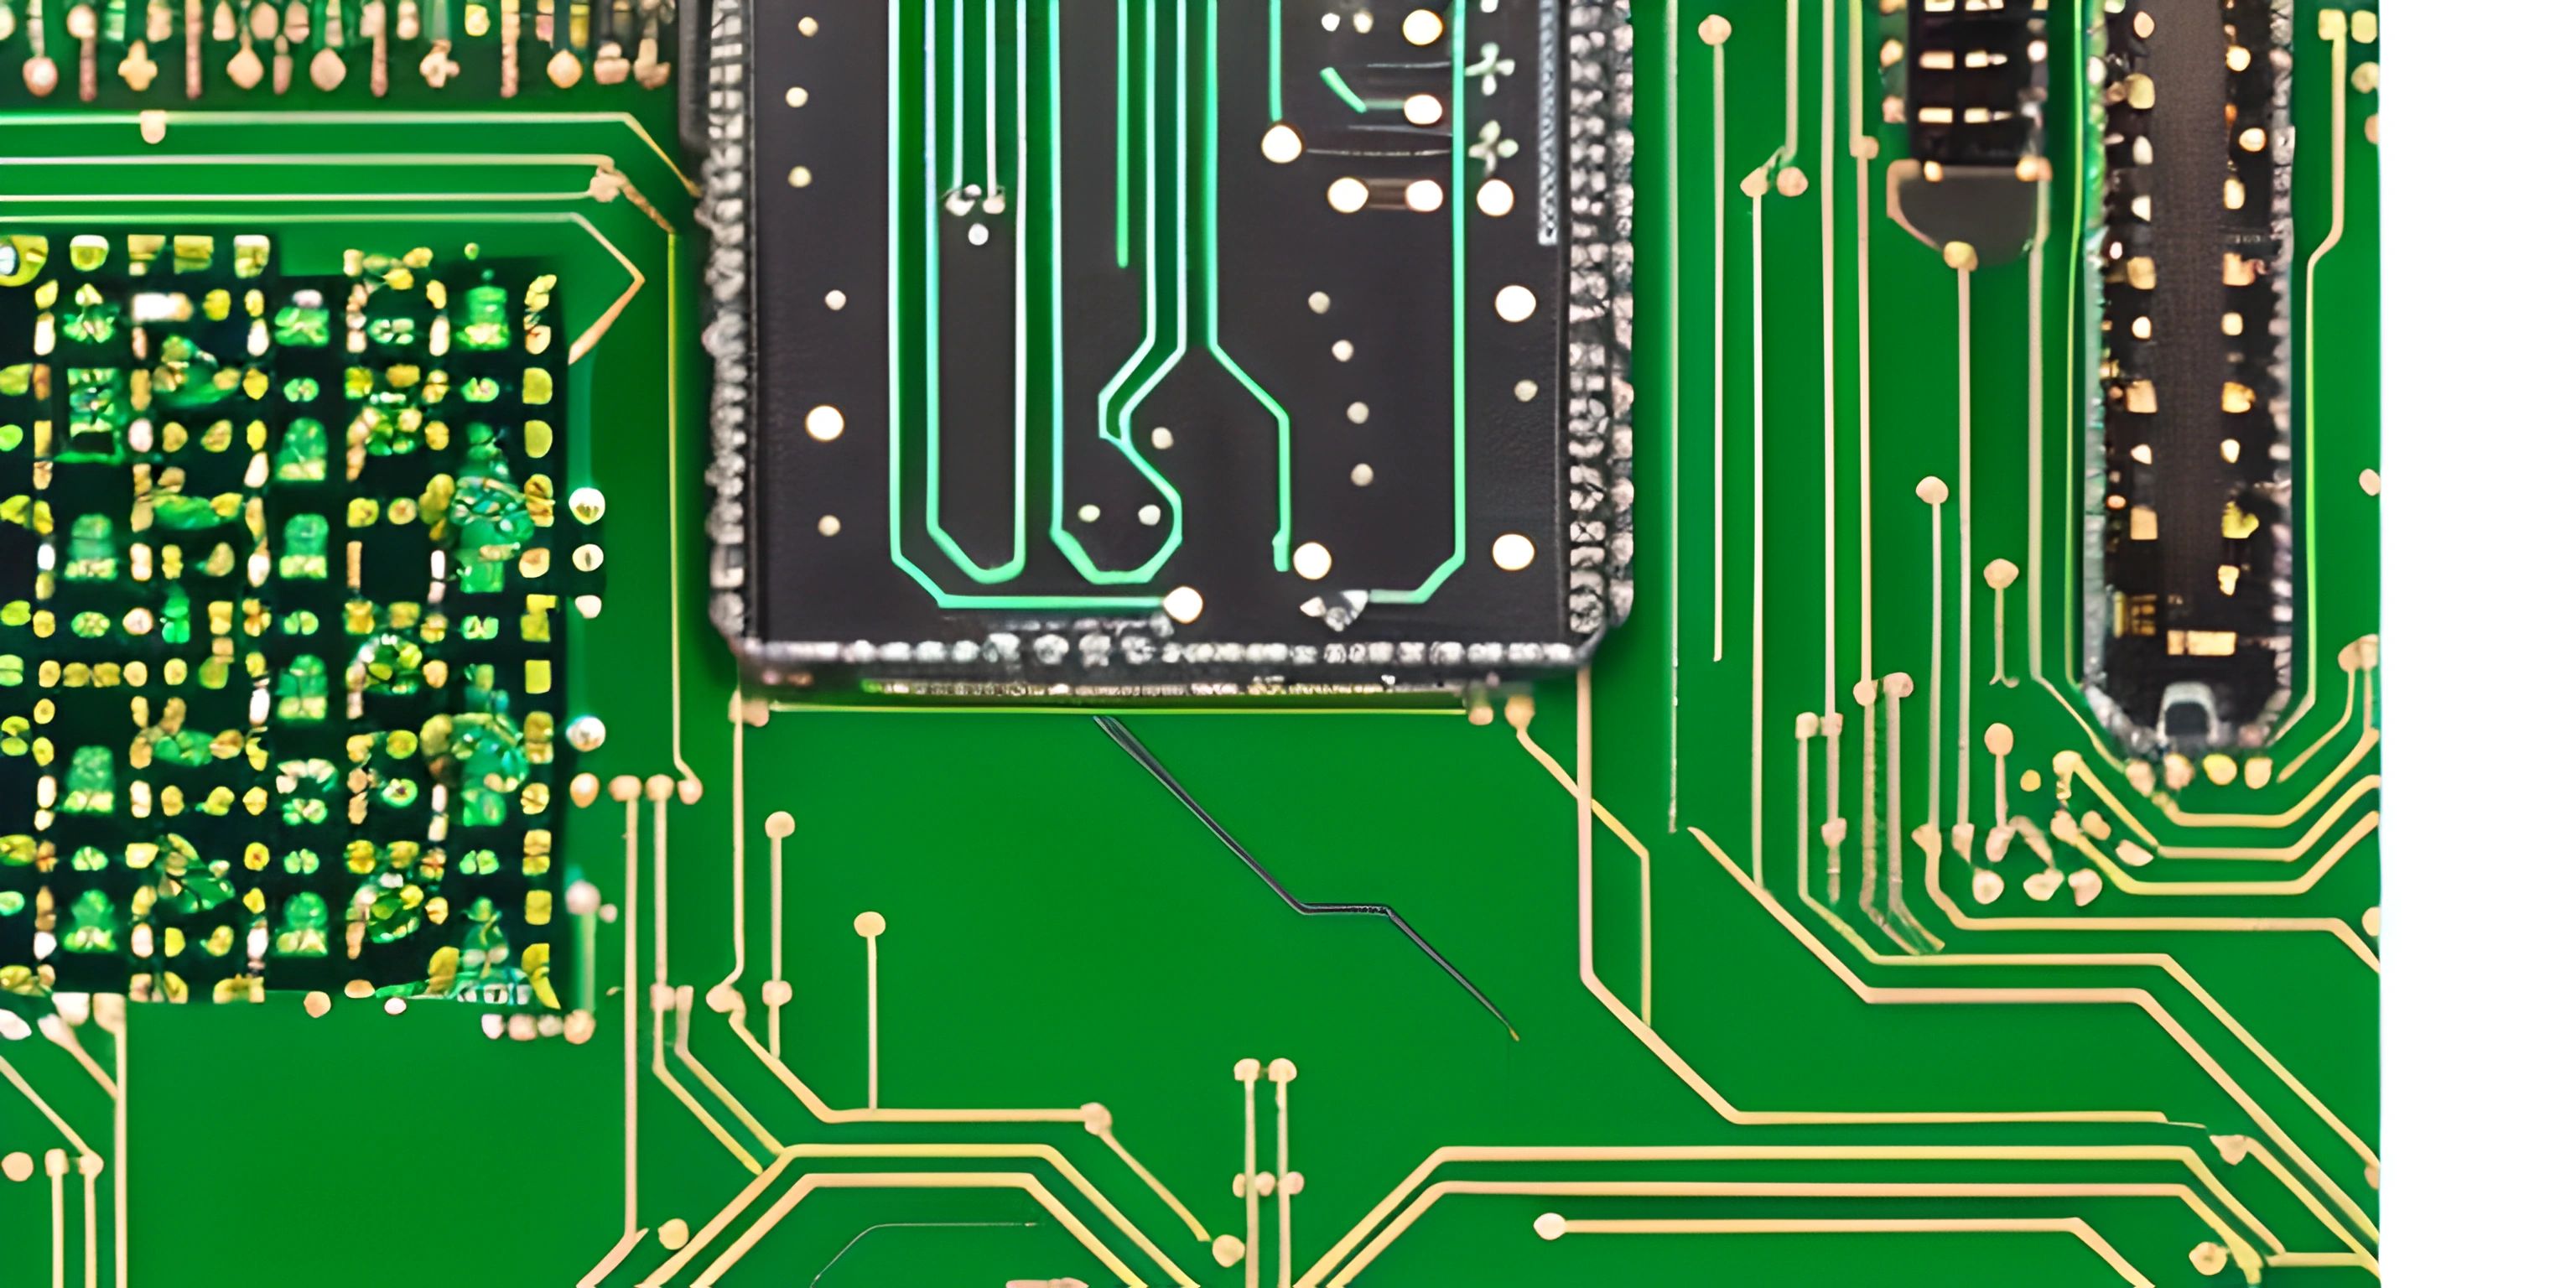 a close up of electronic components in a piece of printed circuit board that is green and yellow